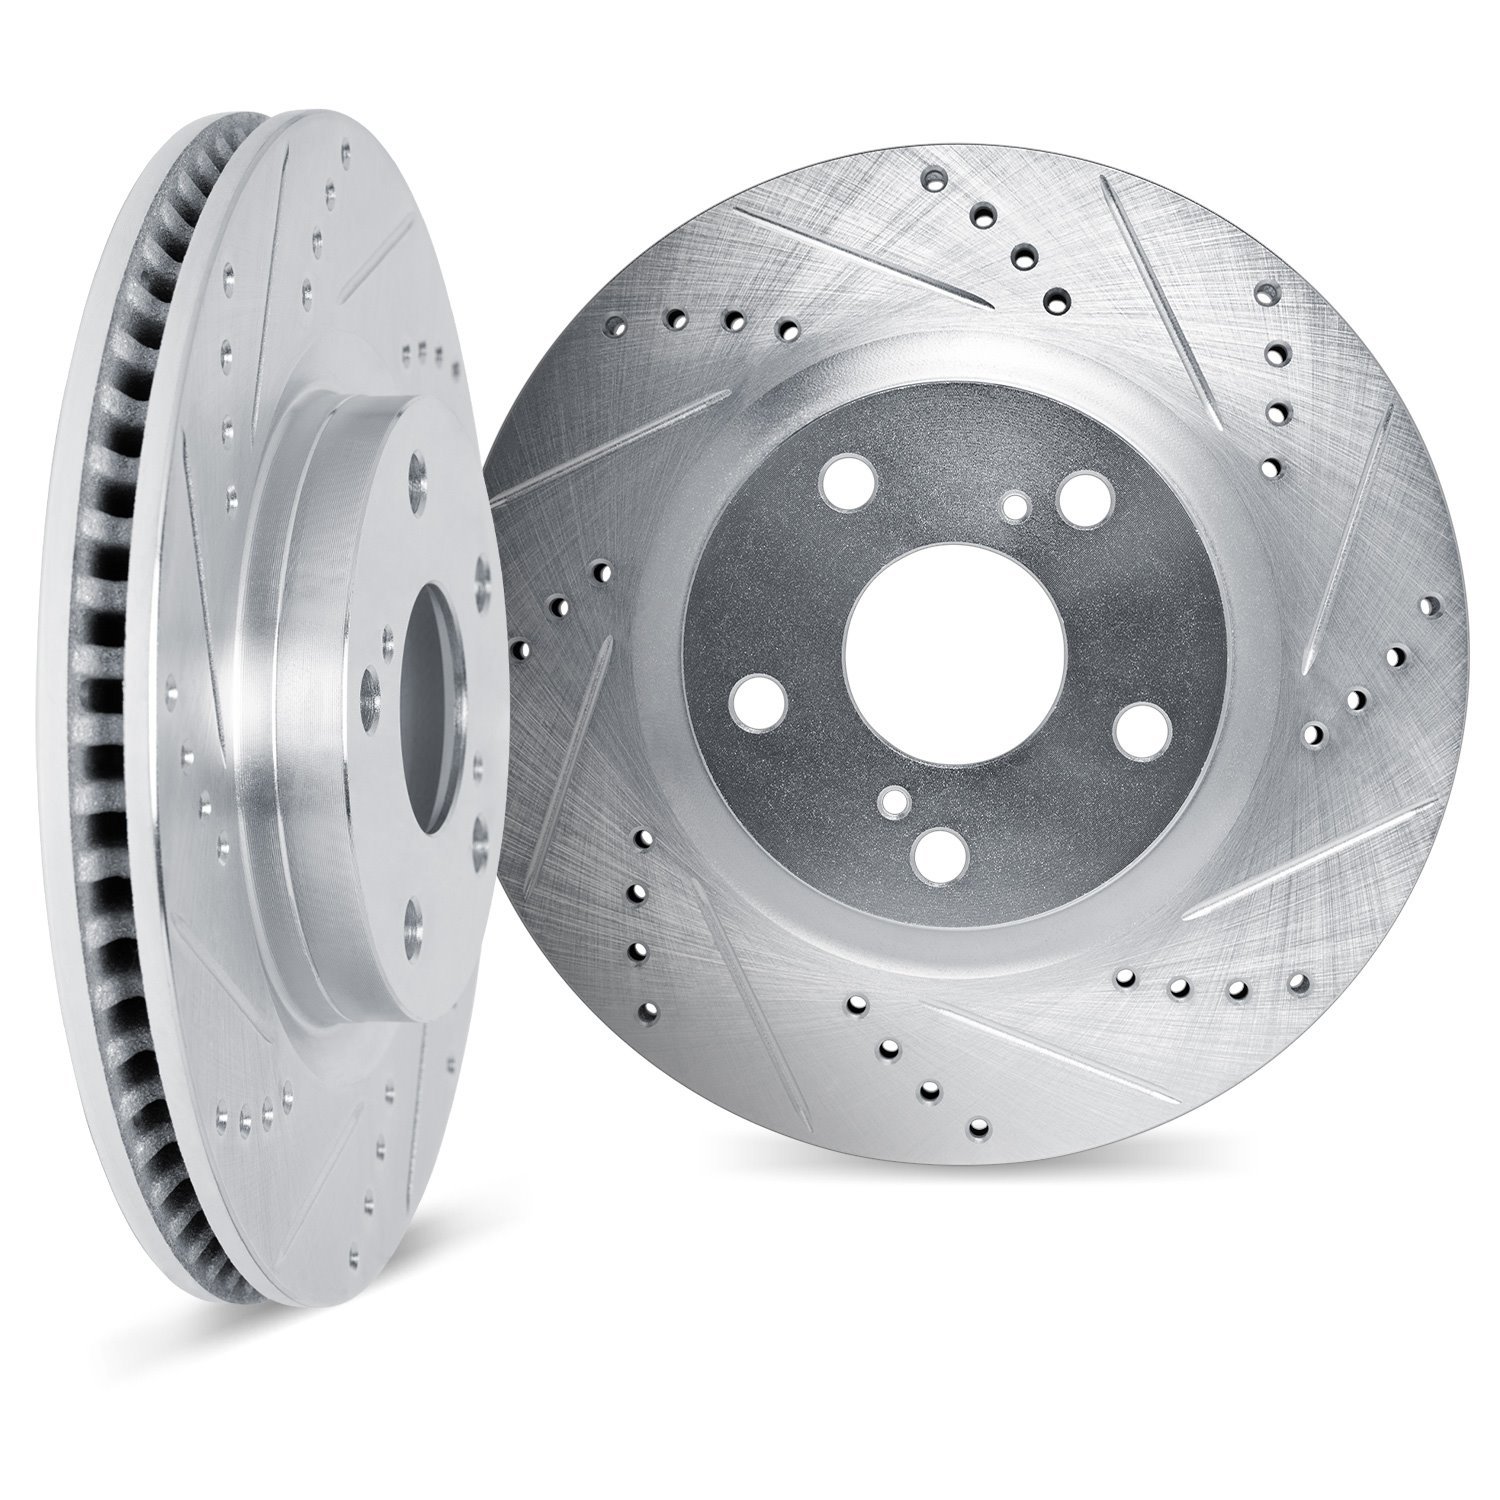 7002-13002 Drilled/Slotted Brake Rotors [Silver], Fits Select Multiple Makes/Models, Position: Front